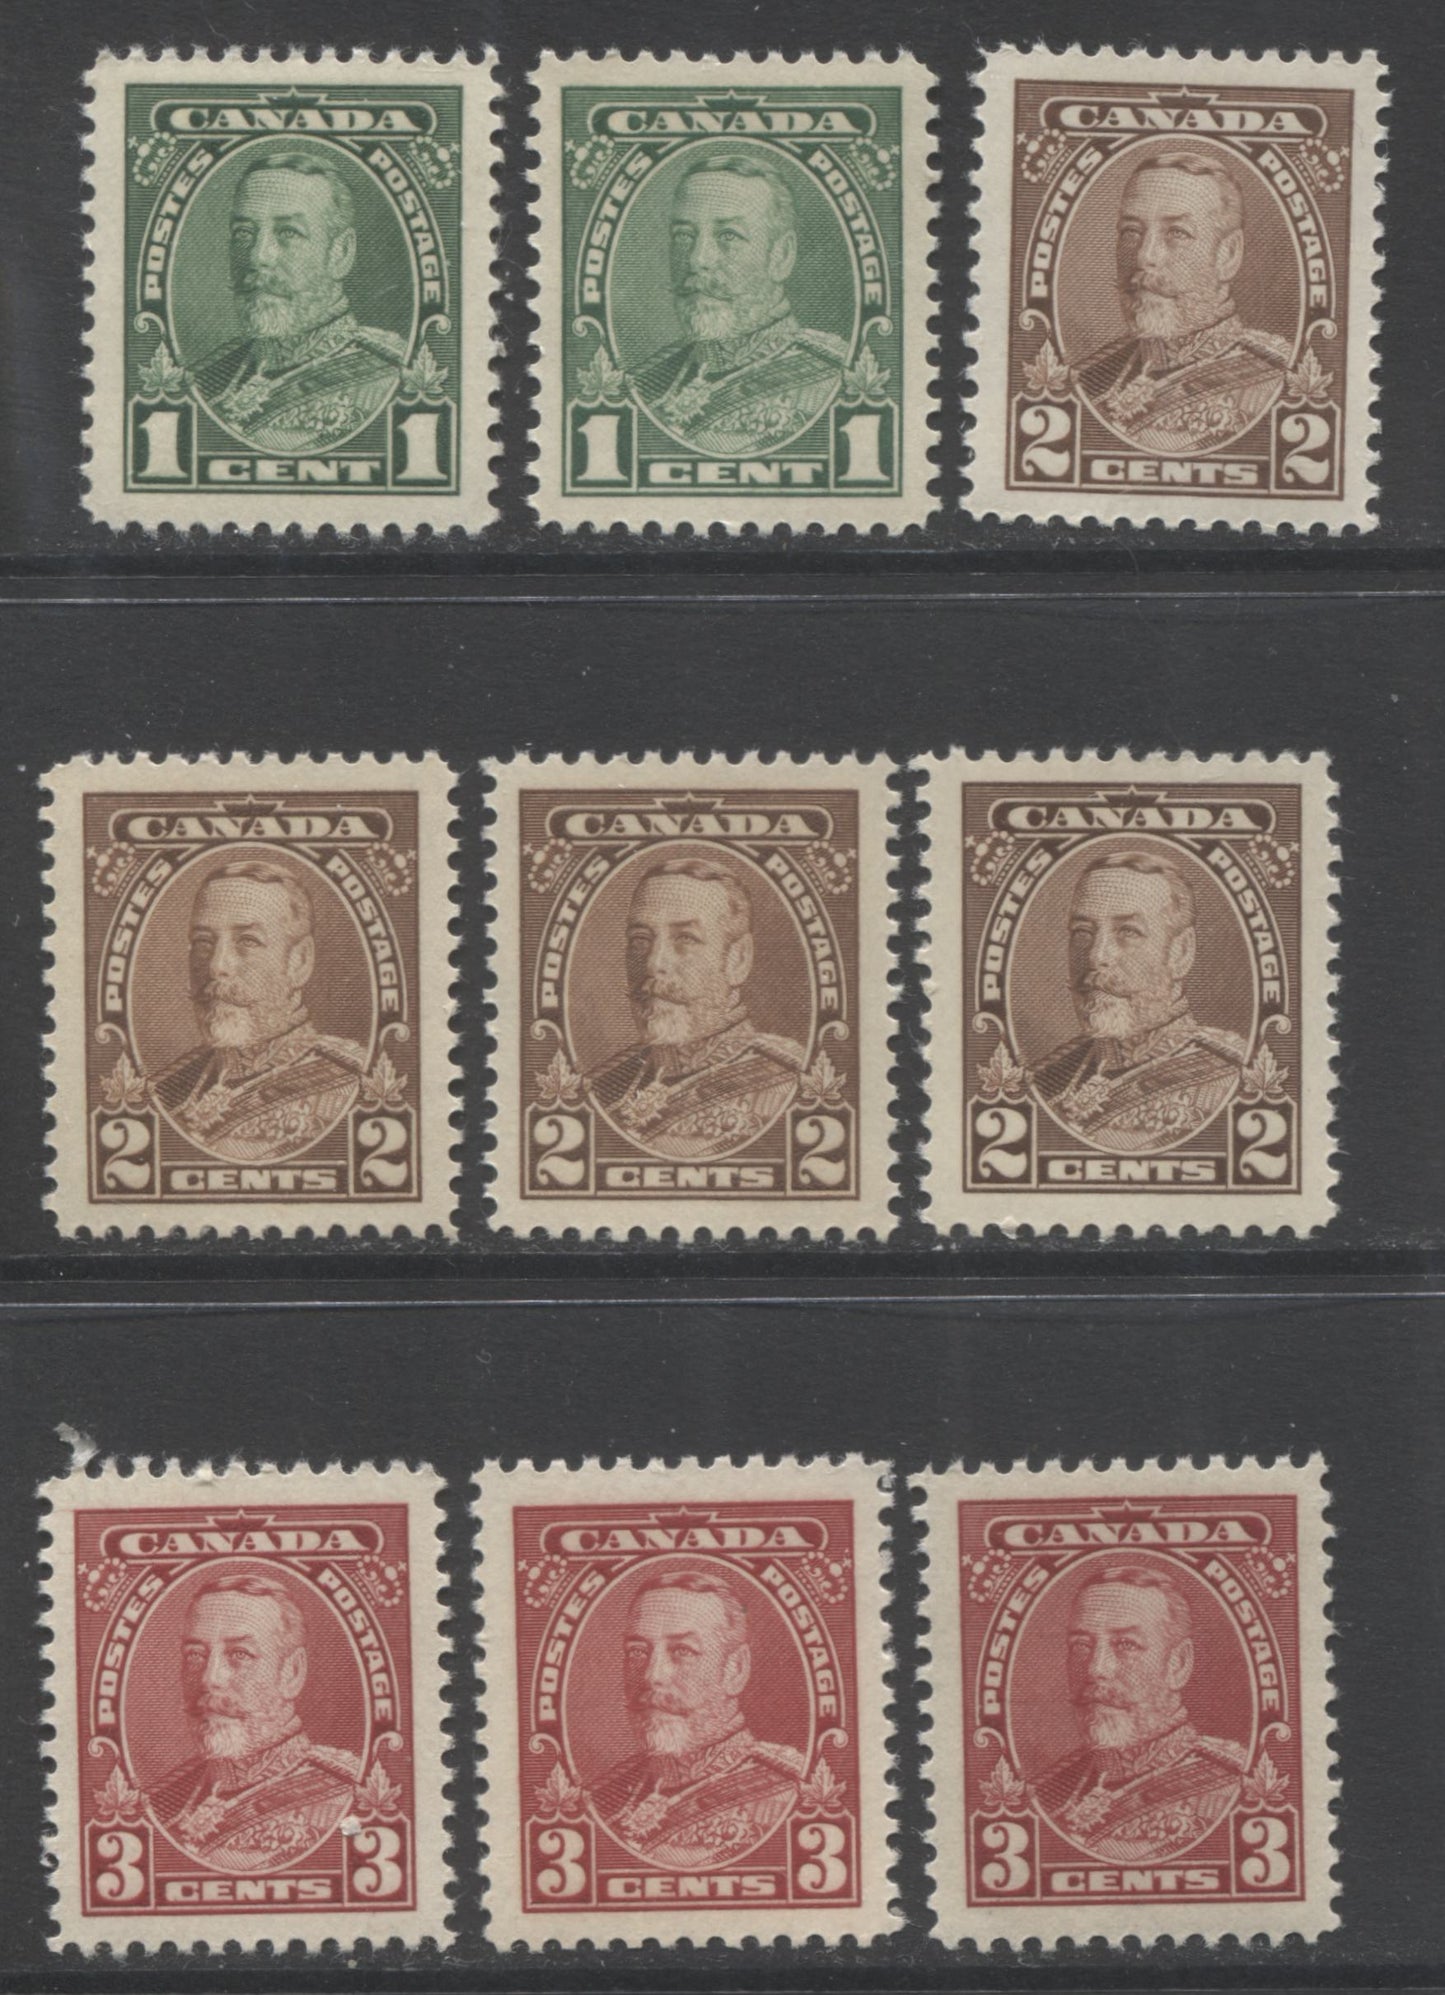 Lot 38 Canada #217-219 1c - 3c Green - Dark Carmine King George V, 1935 Pictorial Issue, 9 VFNH Singles With Different Shades, Papers & Gums